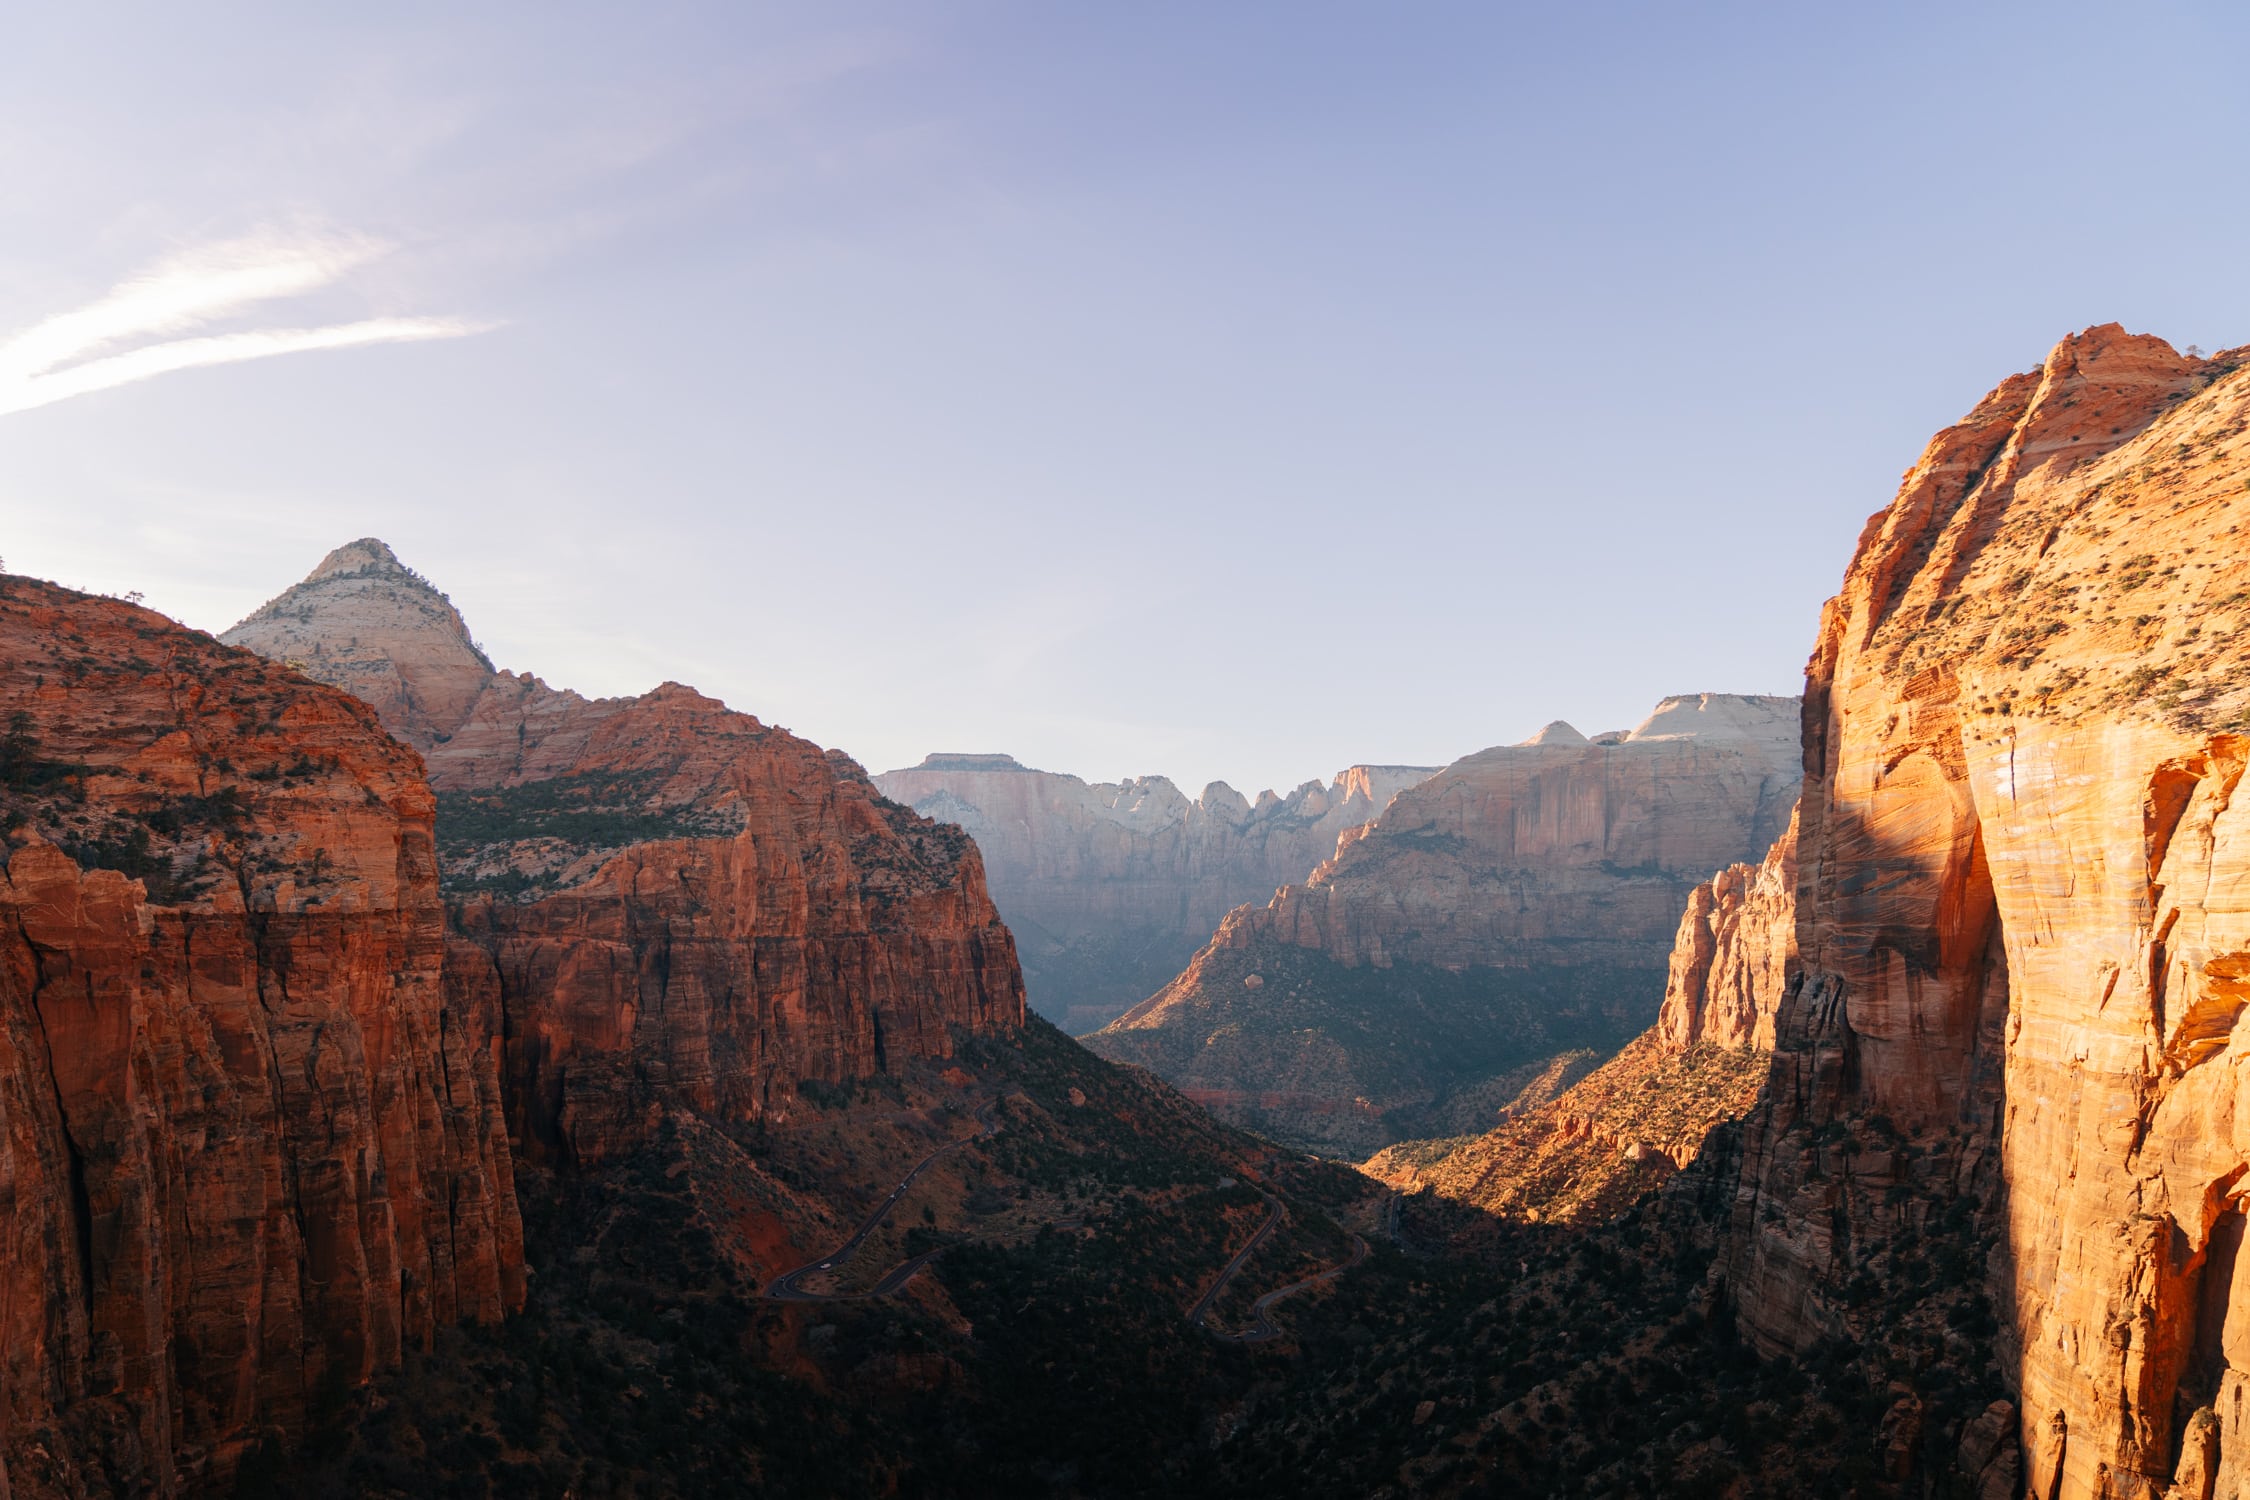 8 Best Hikes in Zion National Park (Tips, Maps, & More)